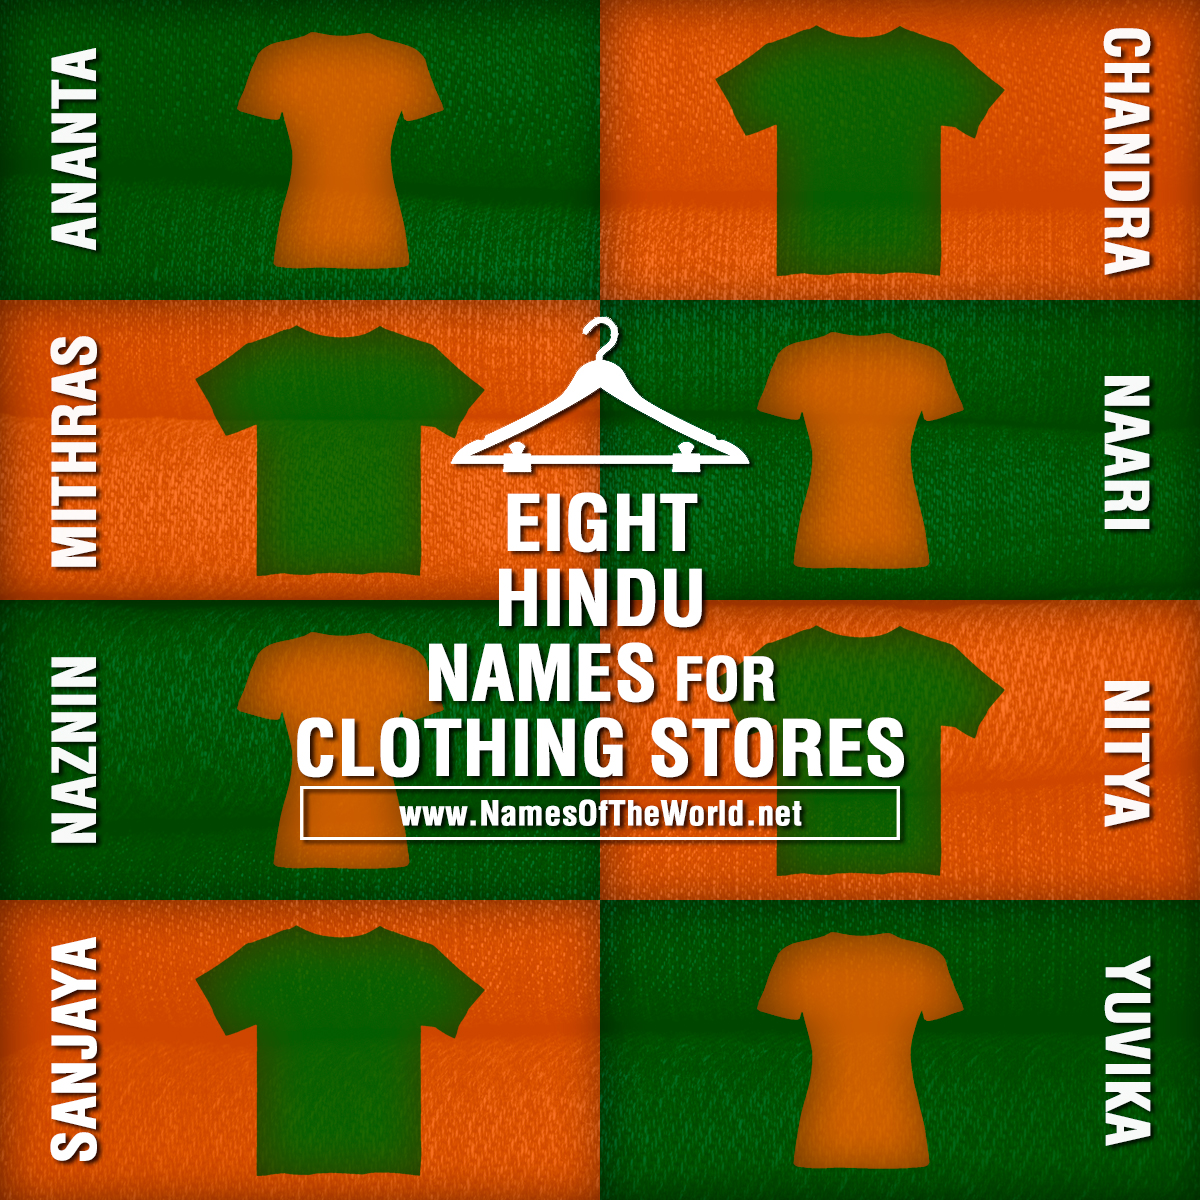 8 HINDU NAMES FOR CLOTHING STORES 